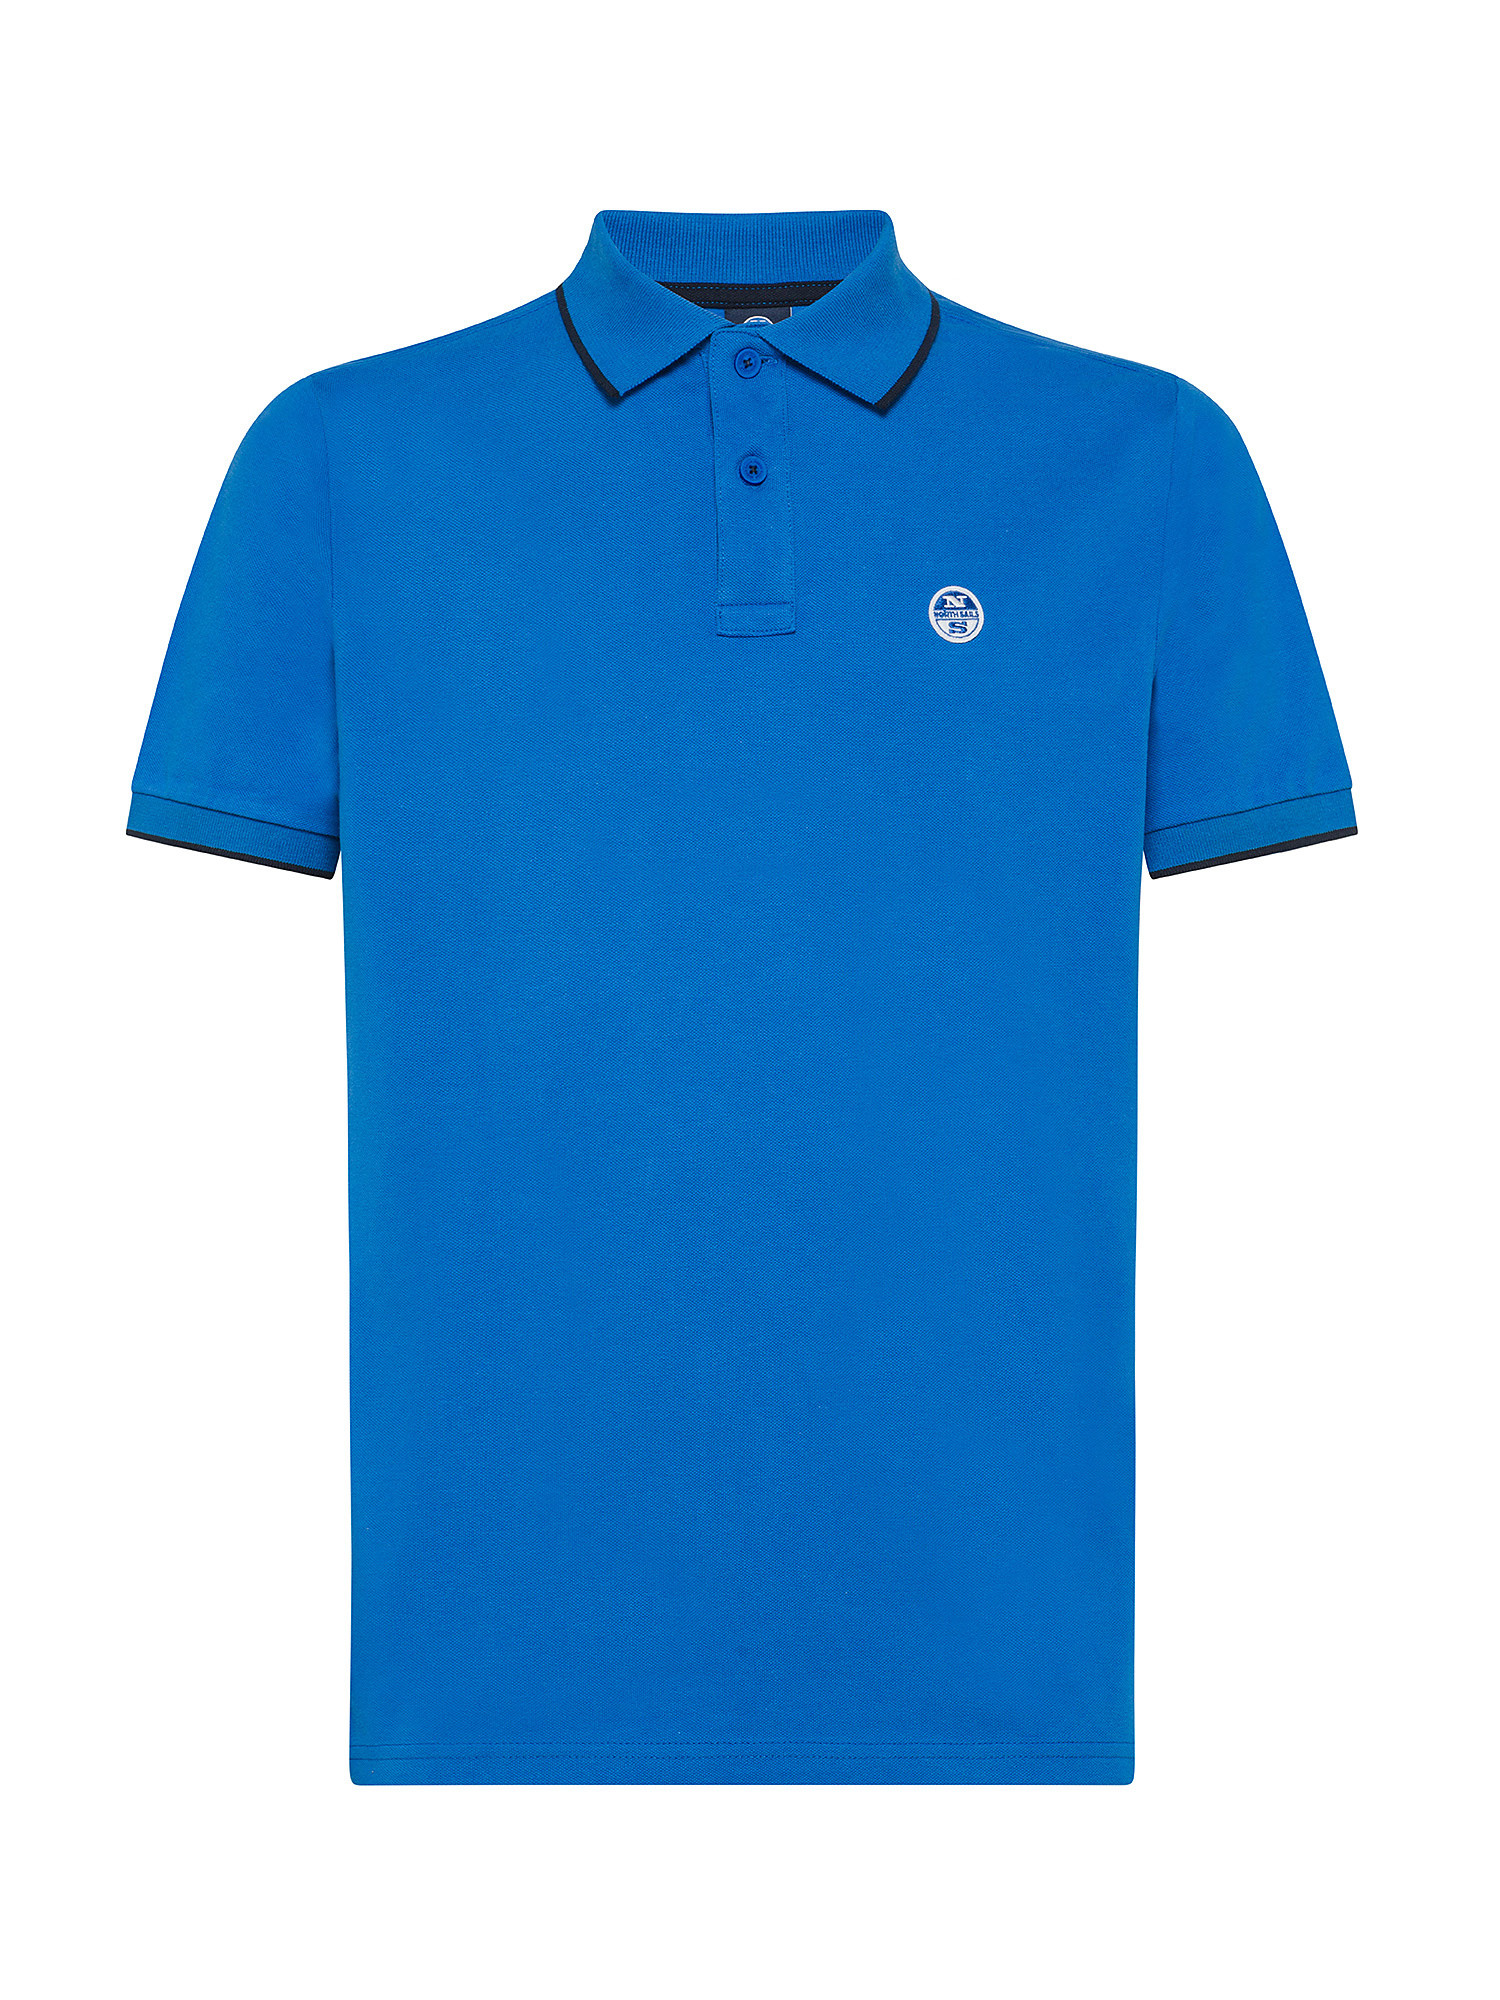 North Sails - Organic cotton piqué polo shirt with micrologo, Electric Blue, large image number 0